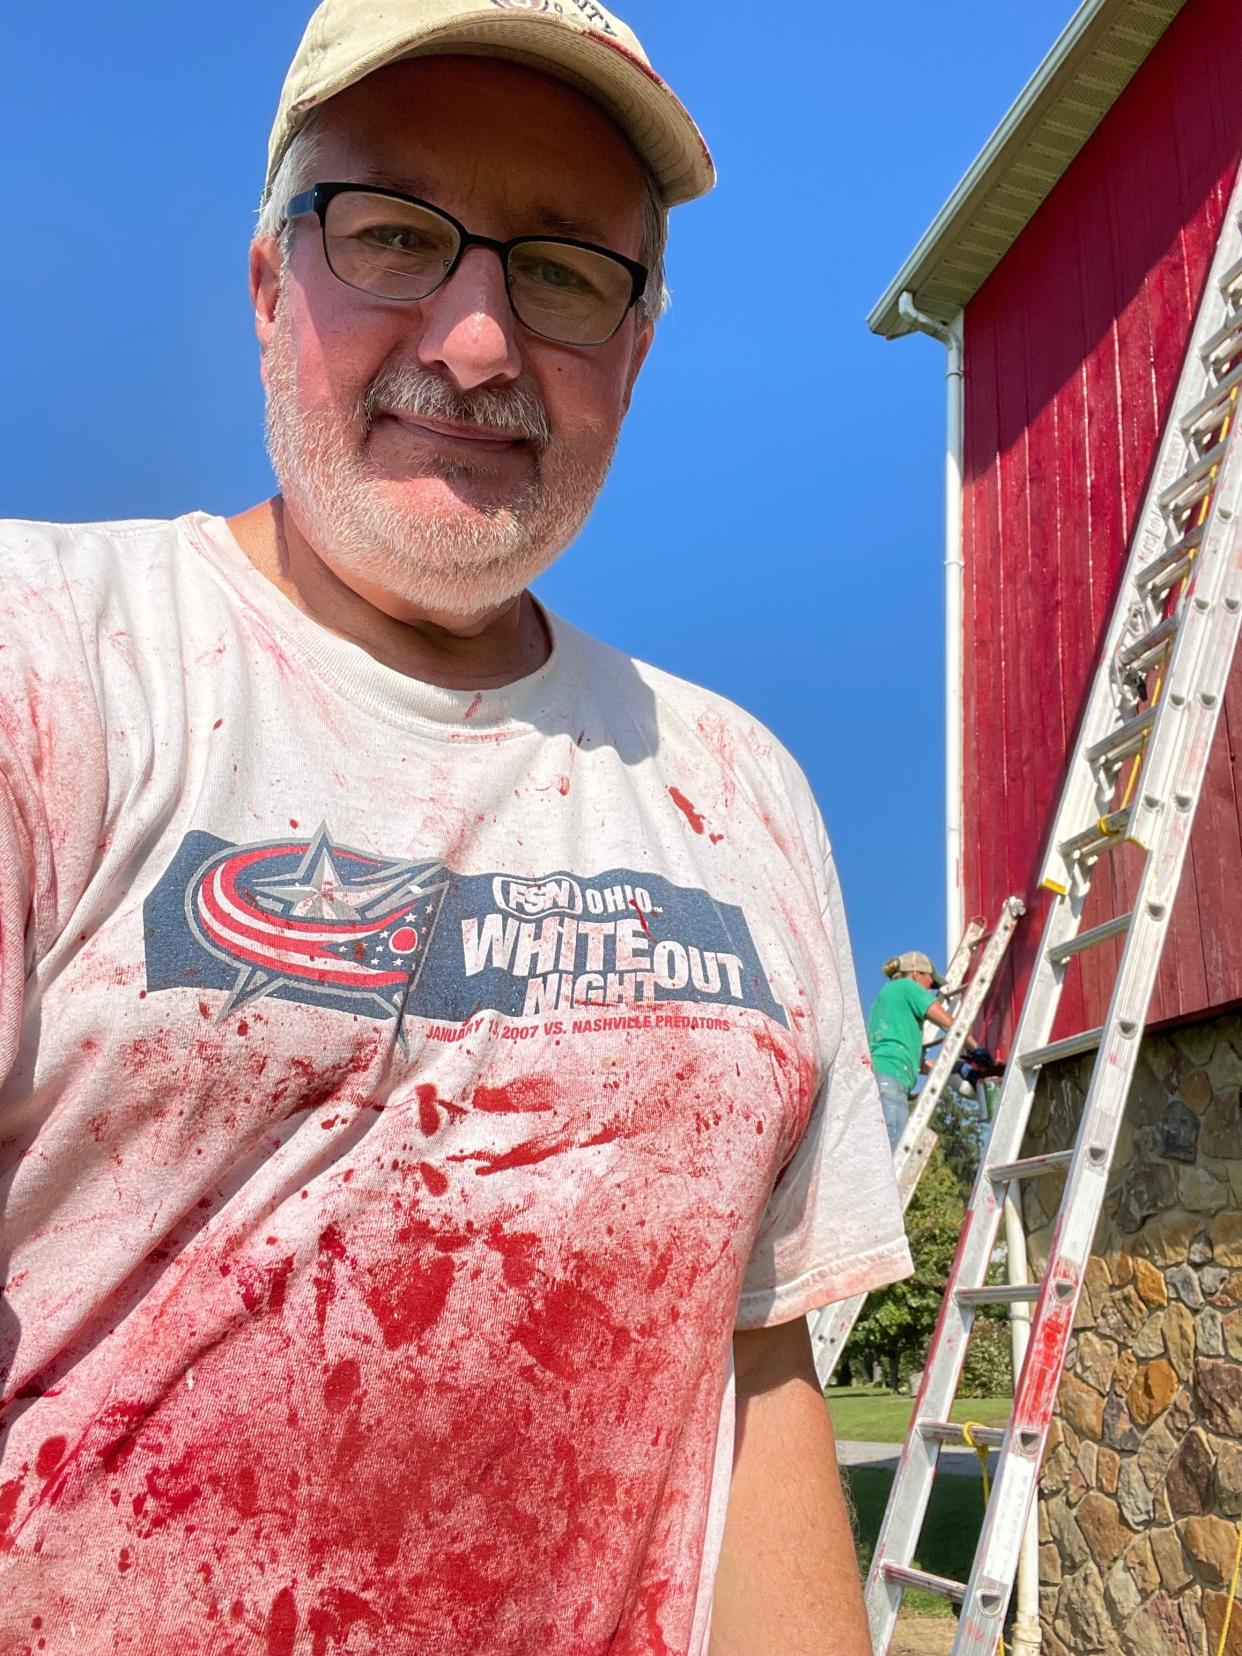 Alan Miller's favorite shirt for painting the old red barn has drawn stares from people wondering if they should call 911.